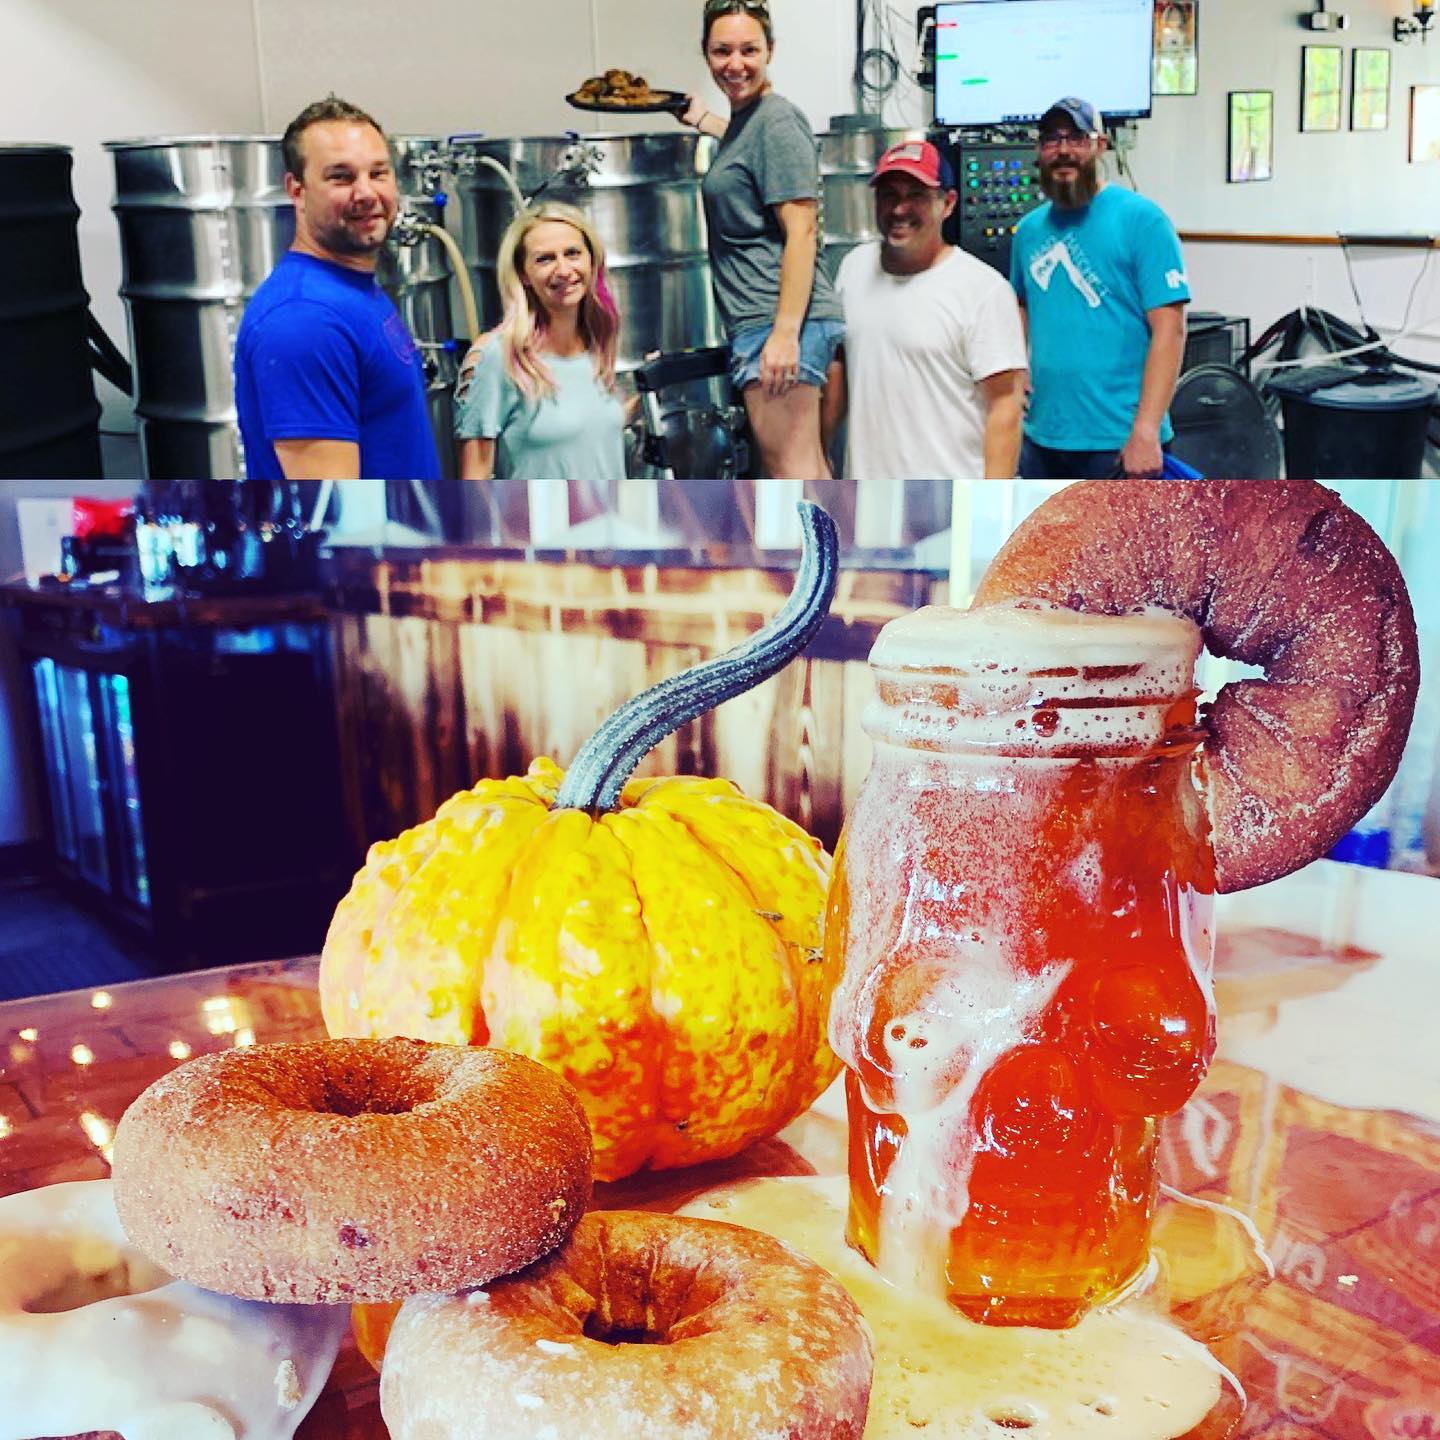 brewers holding plate of donuts (top photo), apple cider donuts surrounding a glass of beer (bottom photo)